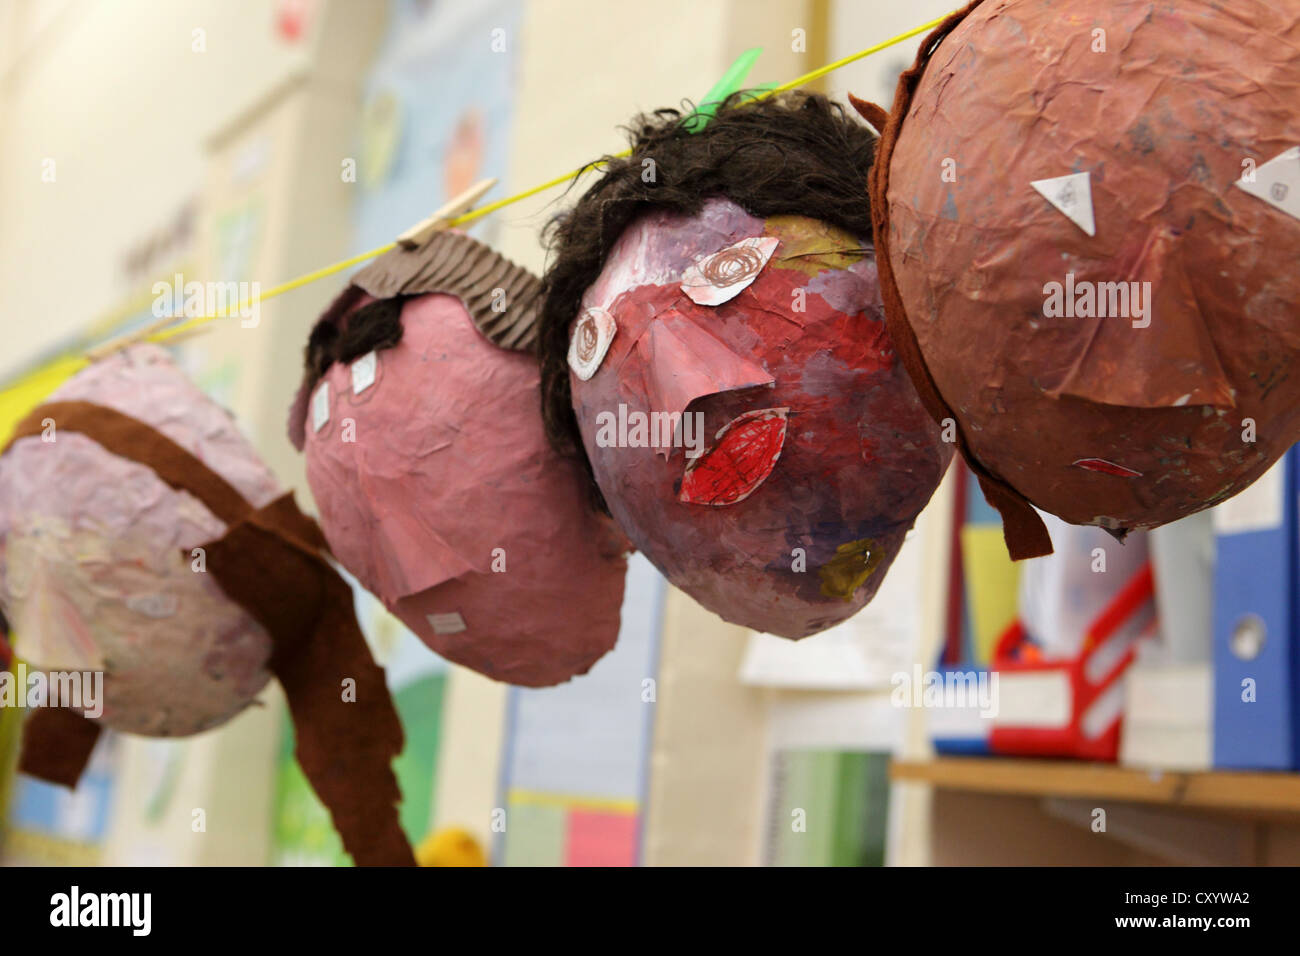 Papier Mache masks, made over balloons. Multi ethnic faces, London Primary School, UK Stock Photo